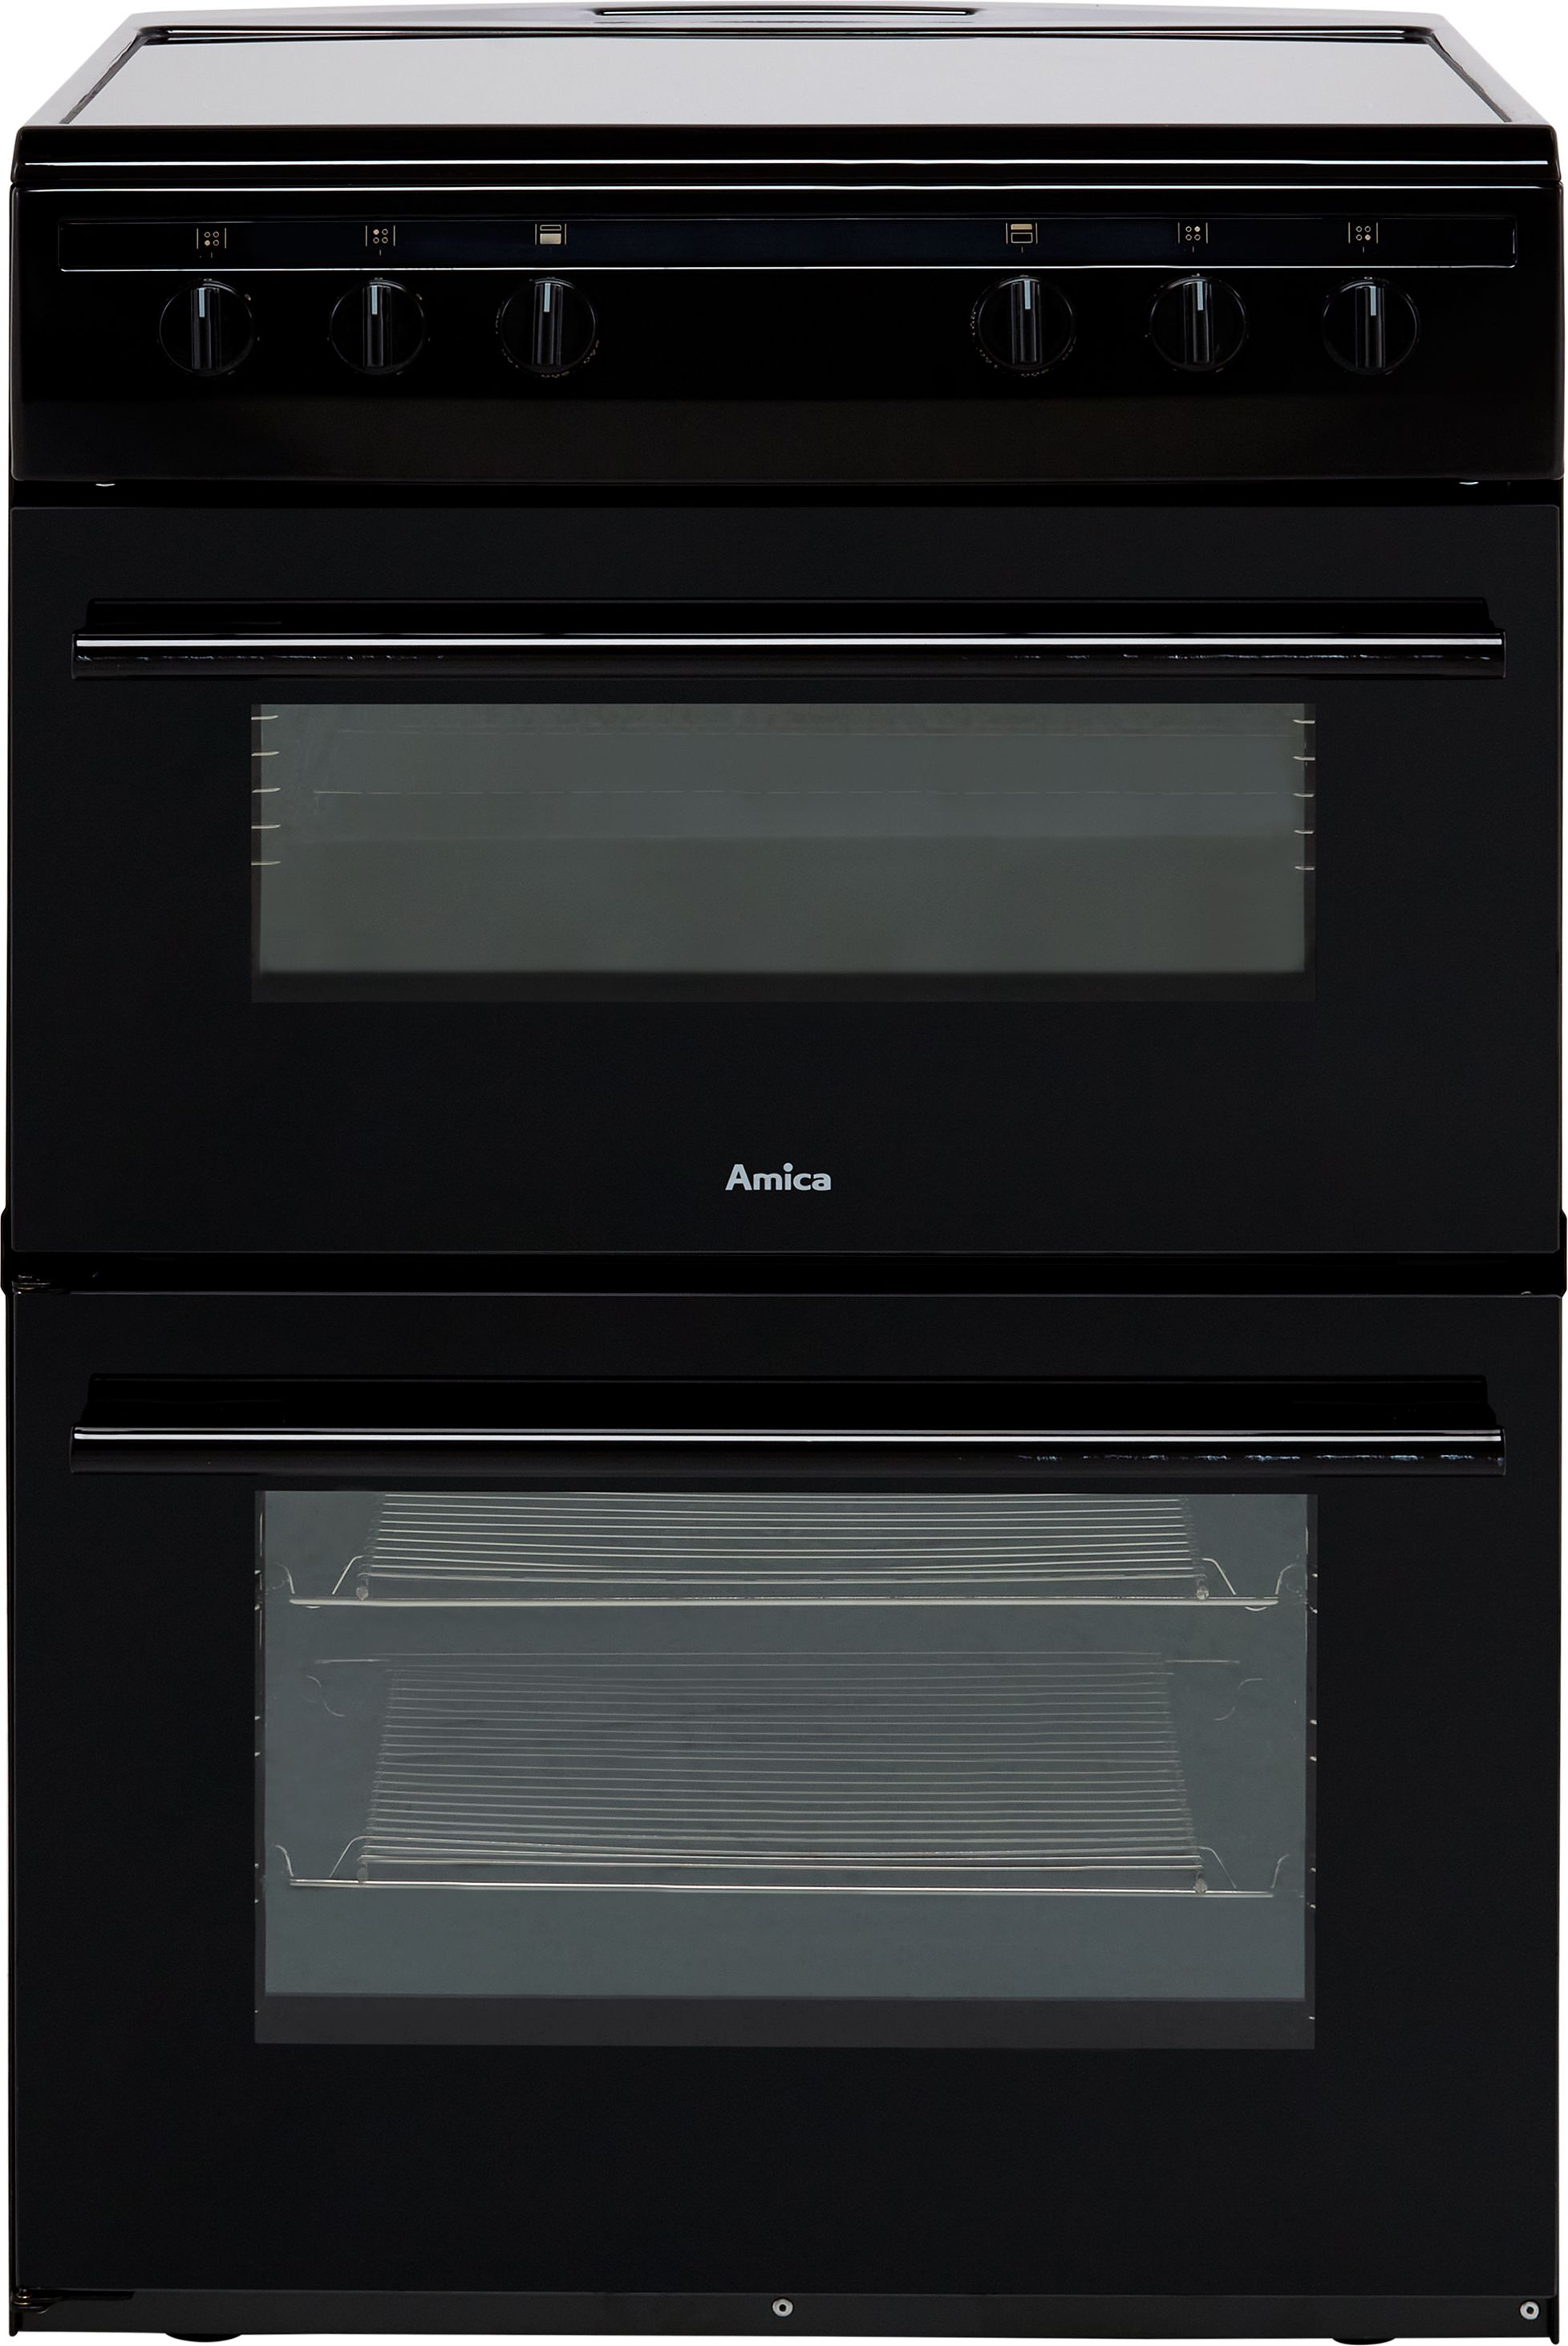 Amica AFC6520BL 60cm Electric Cooker with Ceramic Hob - Black - A/A Rated, Black